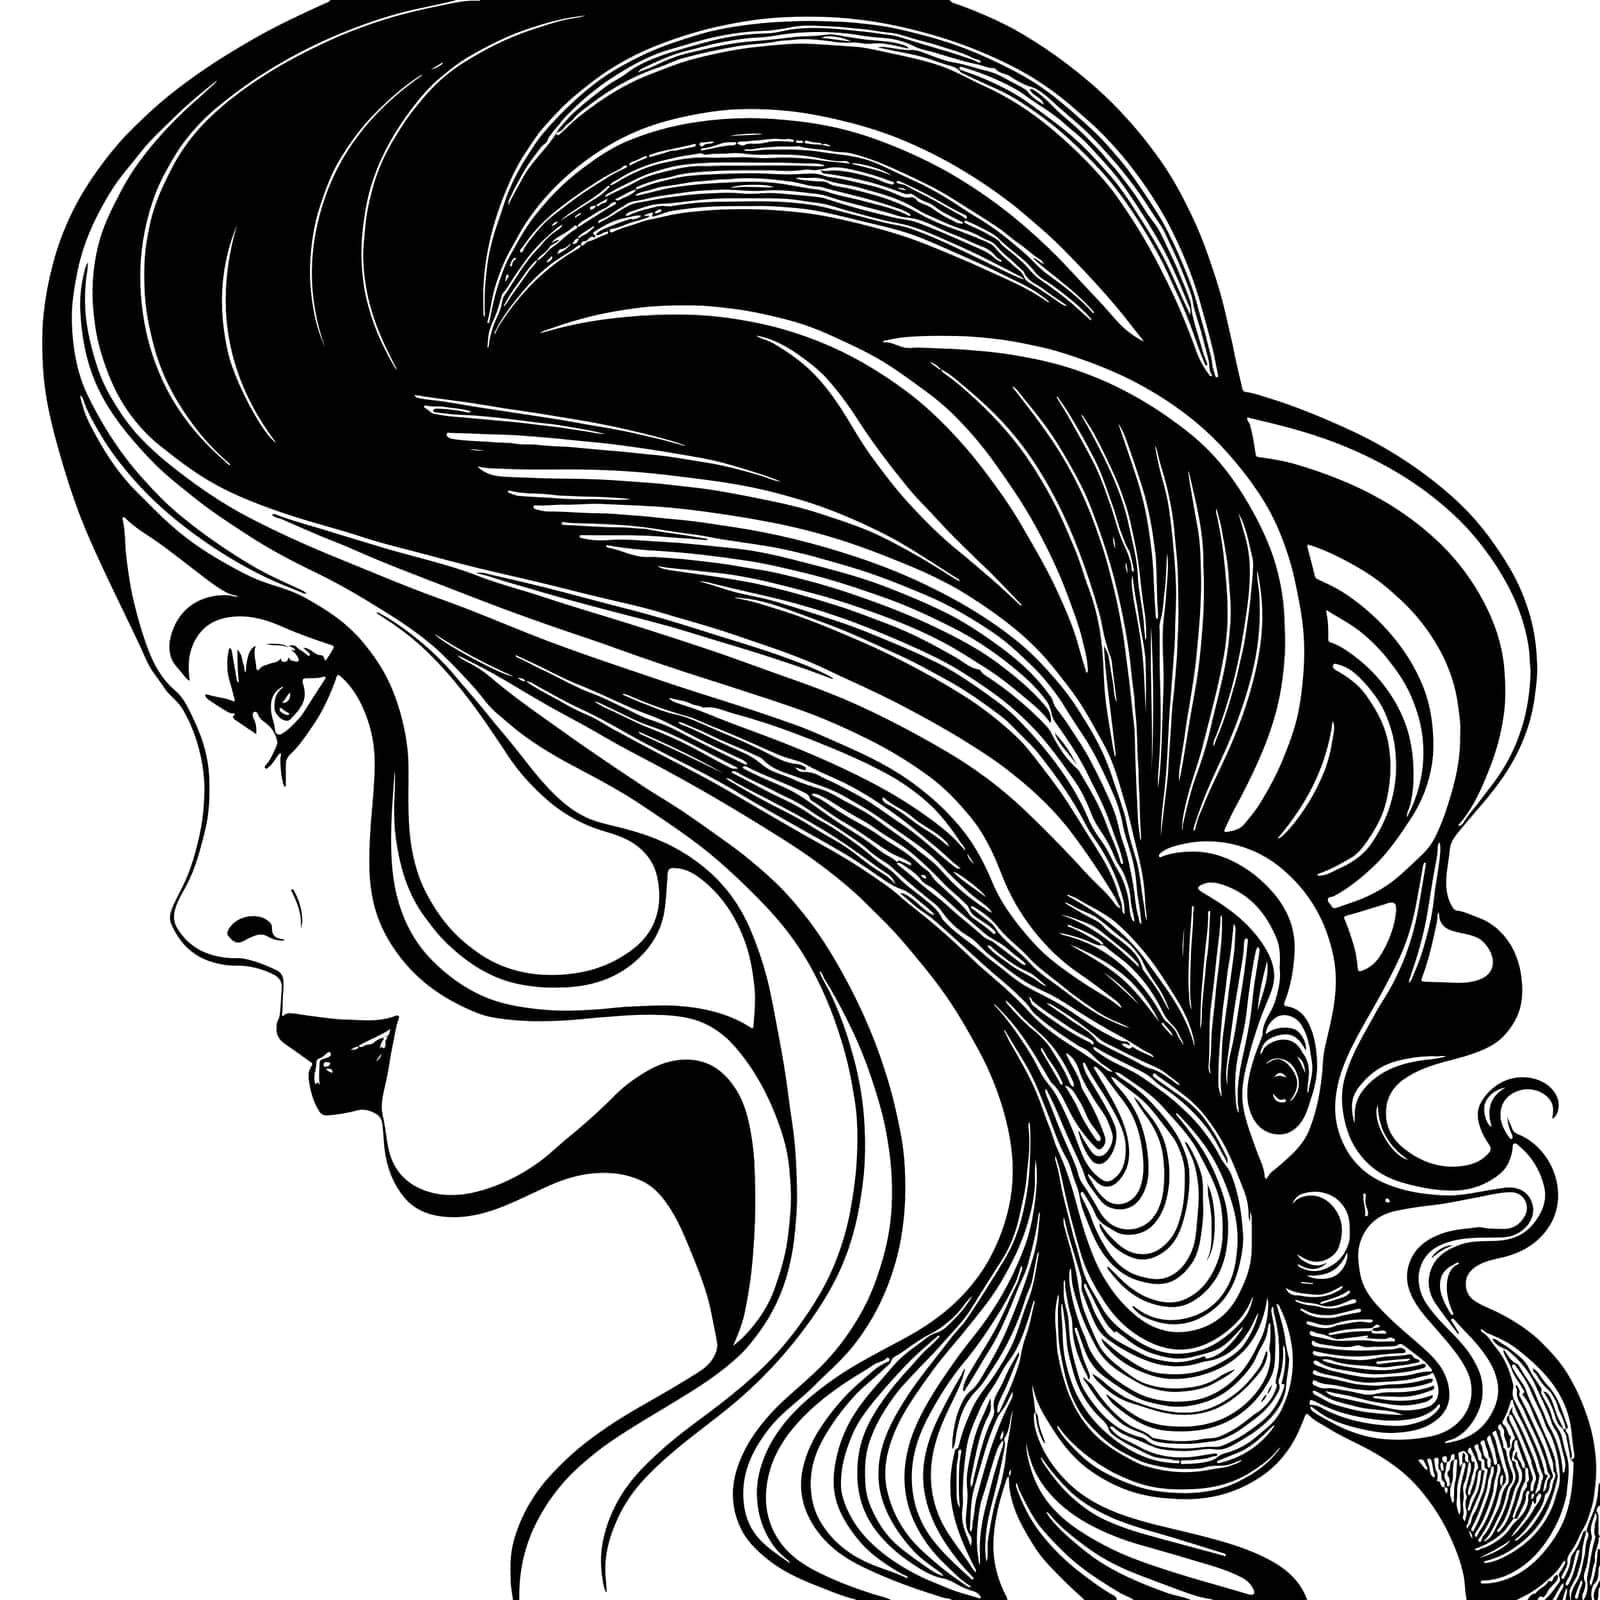 Sketch of Female profile silhouette. Art hairstyle black and white design